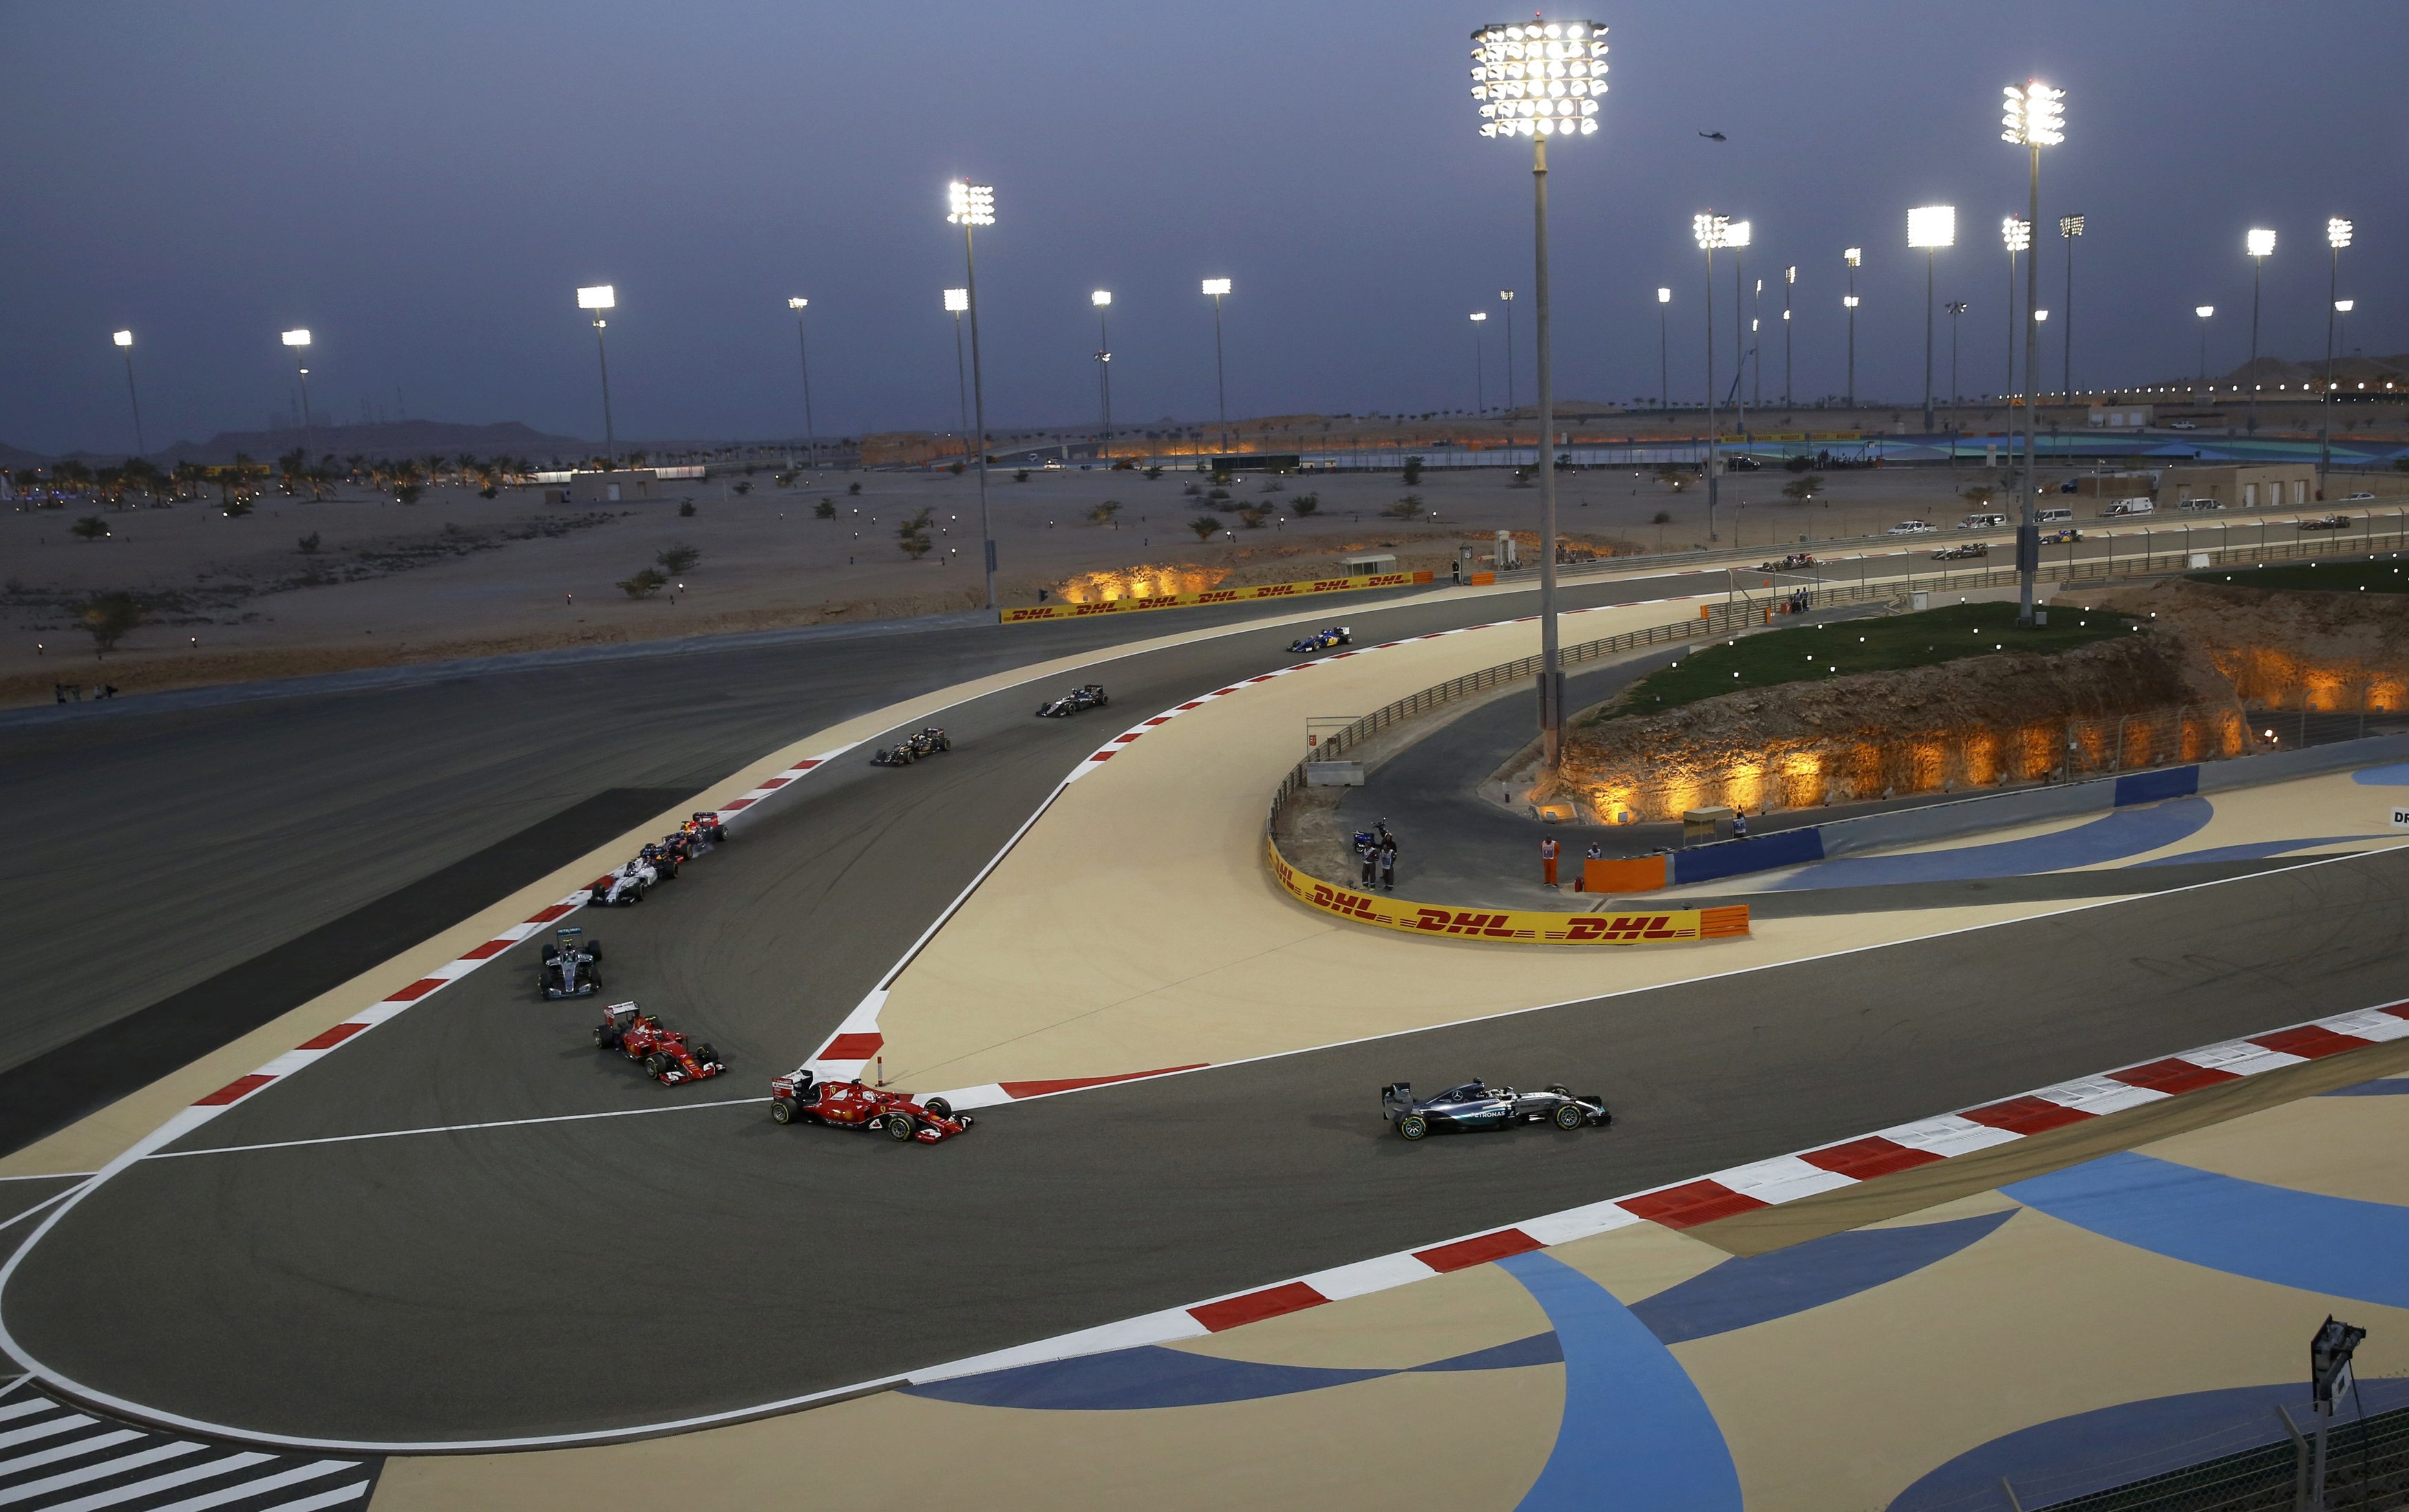 12 stunning photos from a Formula 1 Grand Prix under the lights in